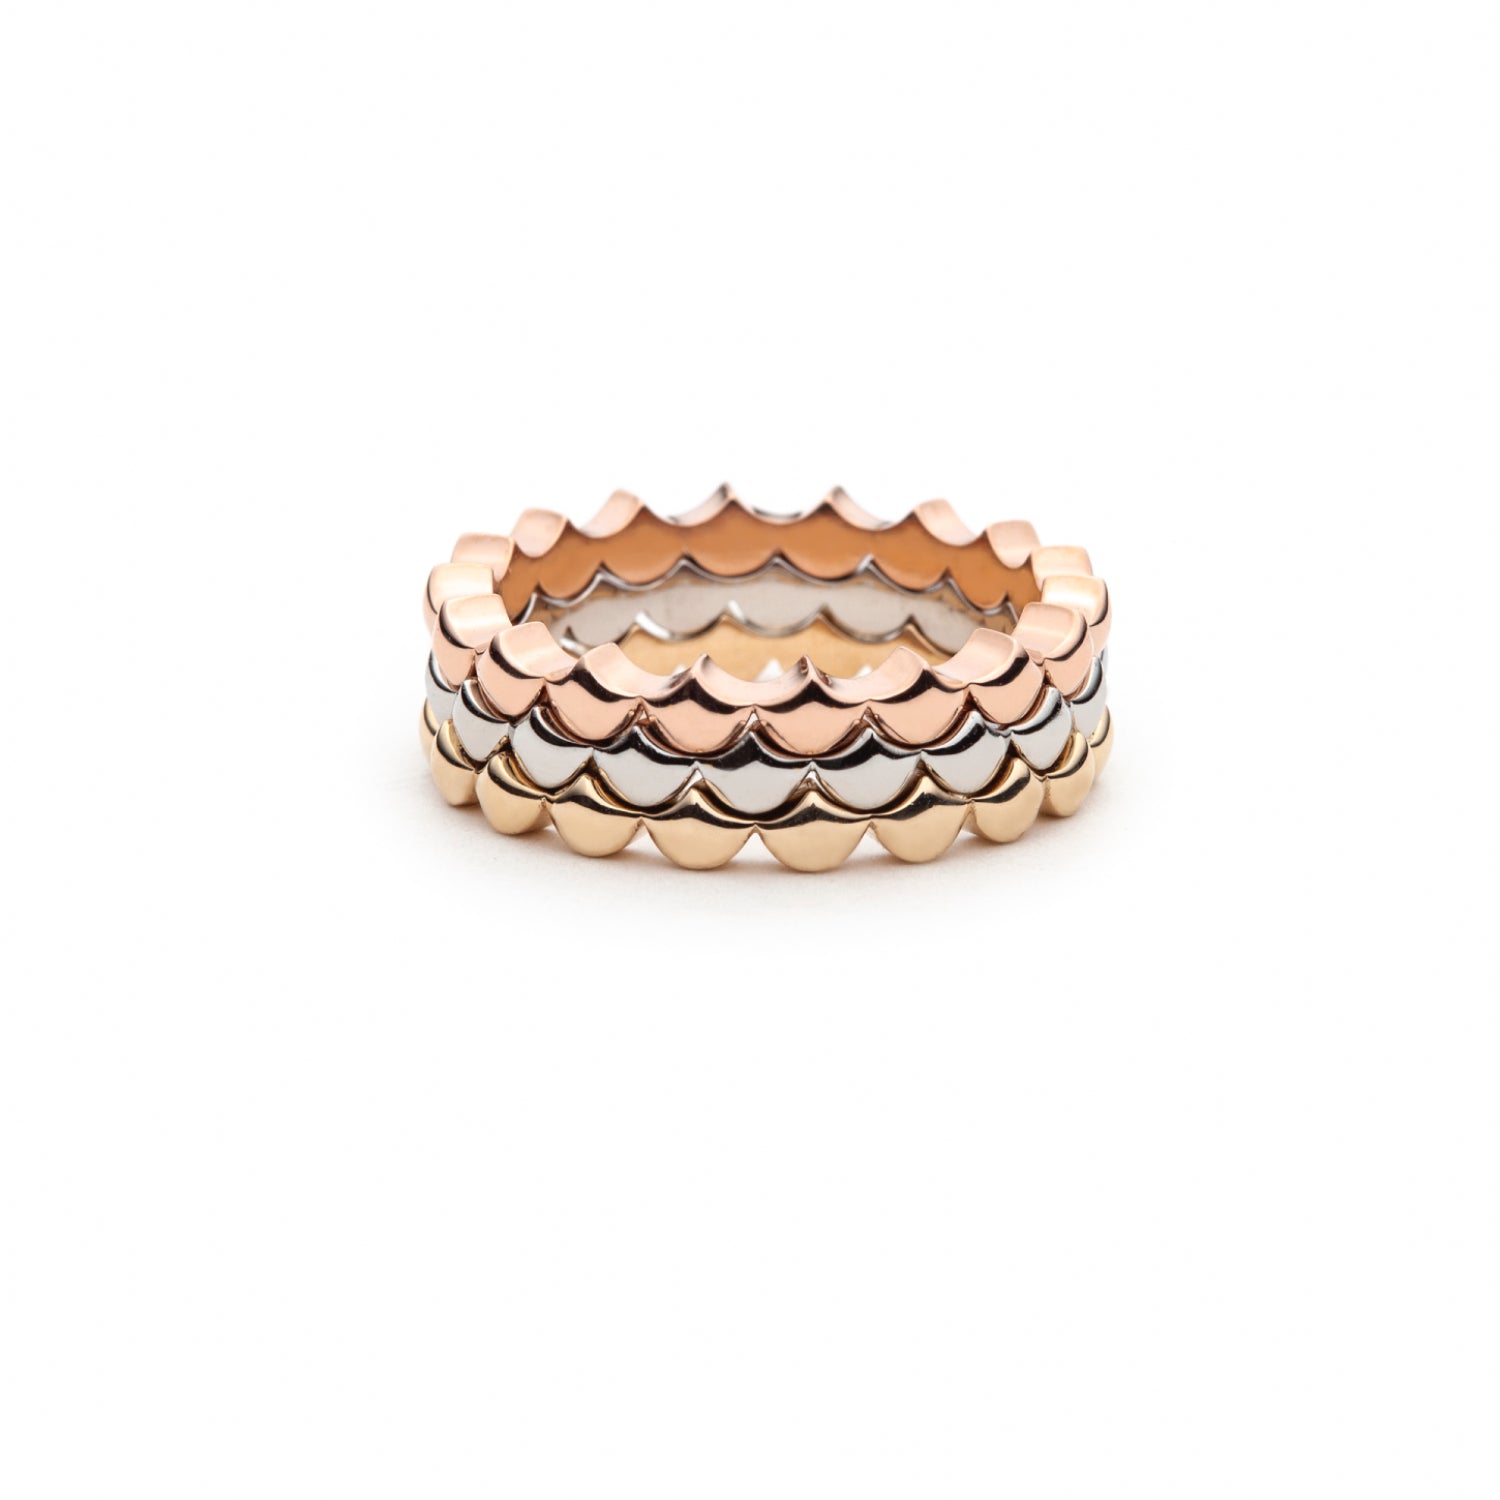 Lepia Mermaid Scales Motif Ring in Different Metals